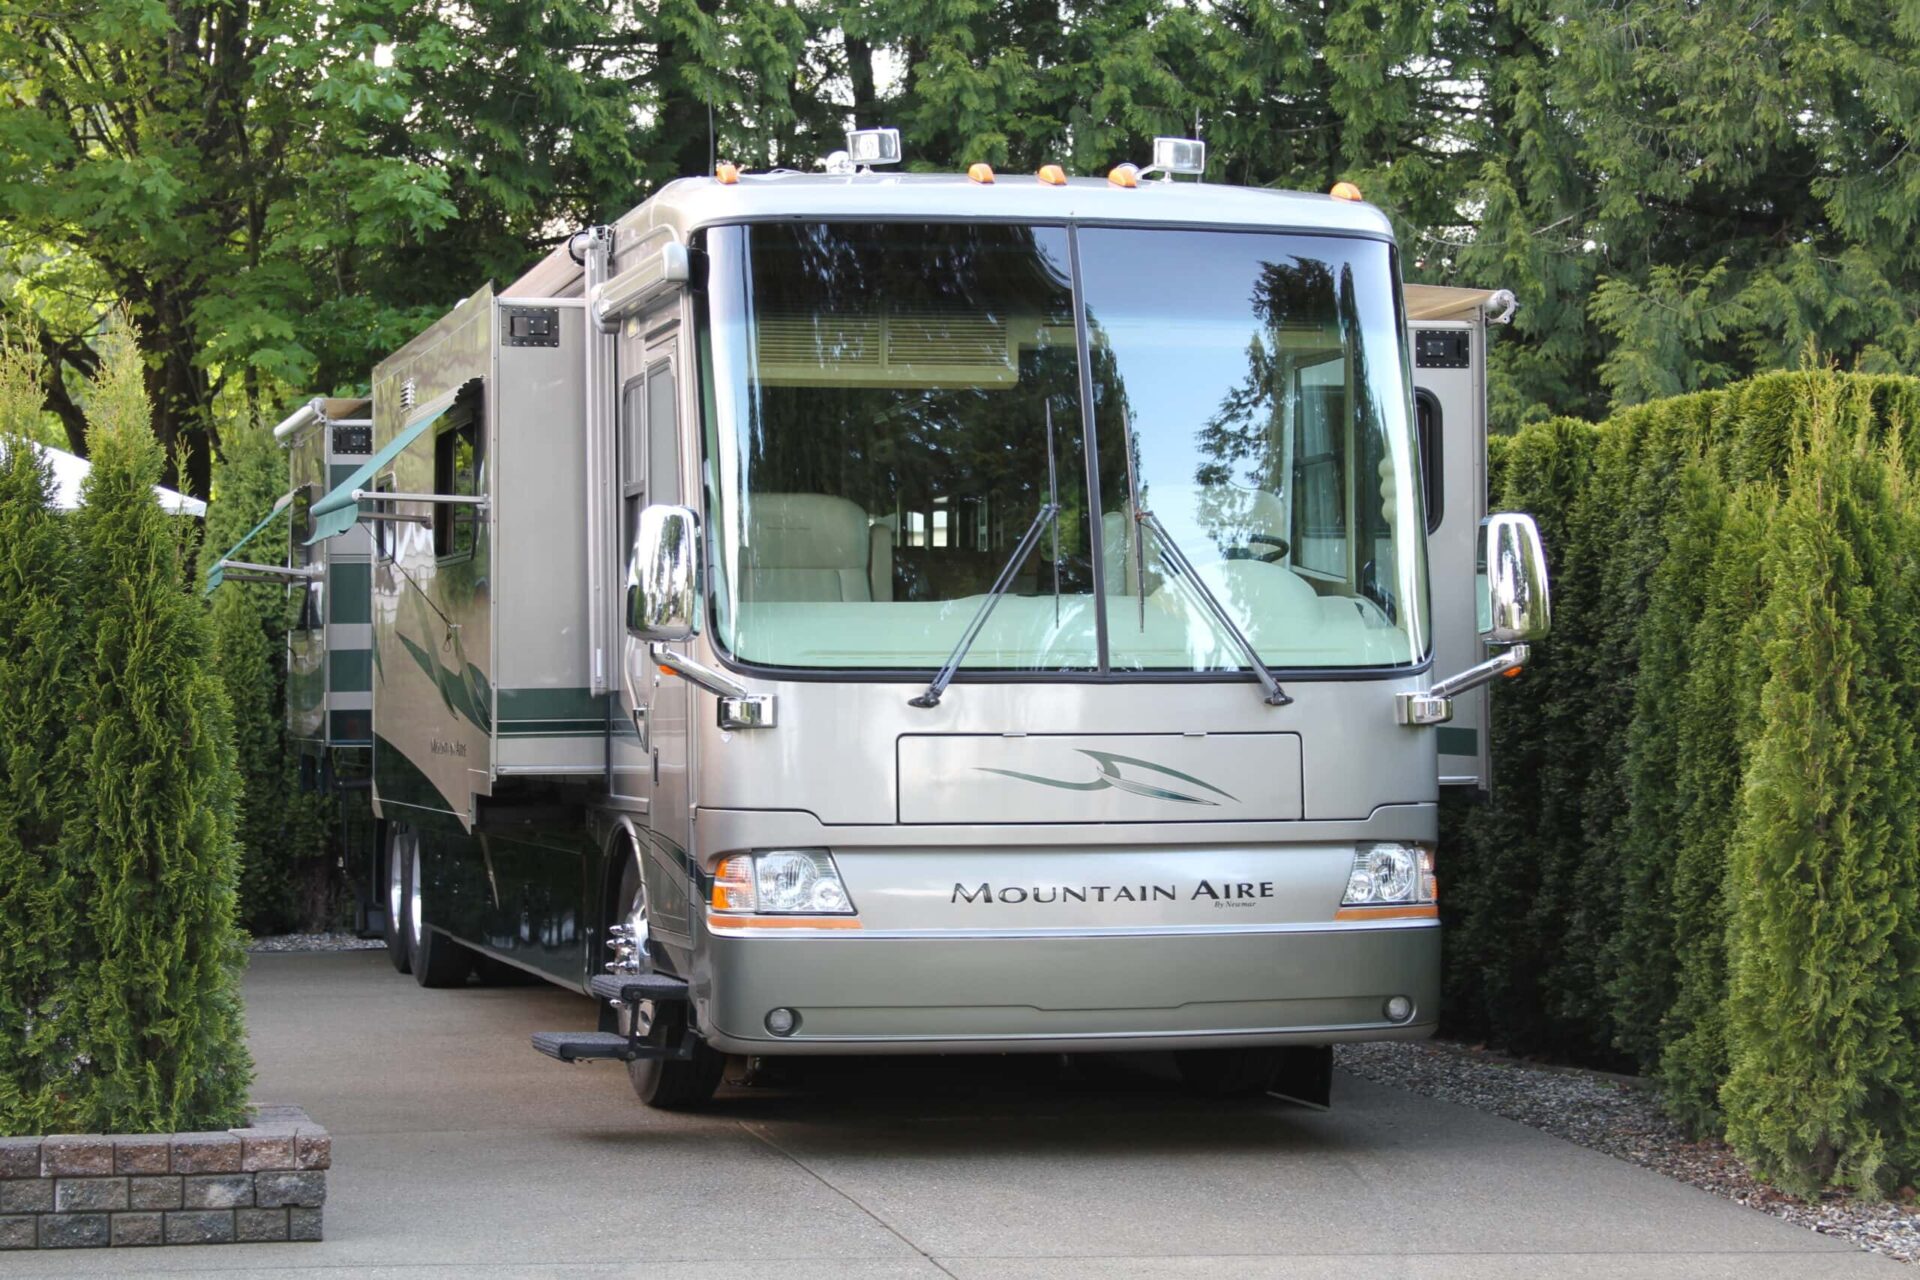 The RVgeeks' motorhome parked on their property in British Columbia